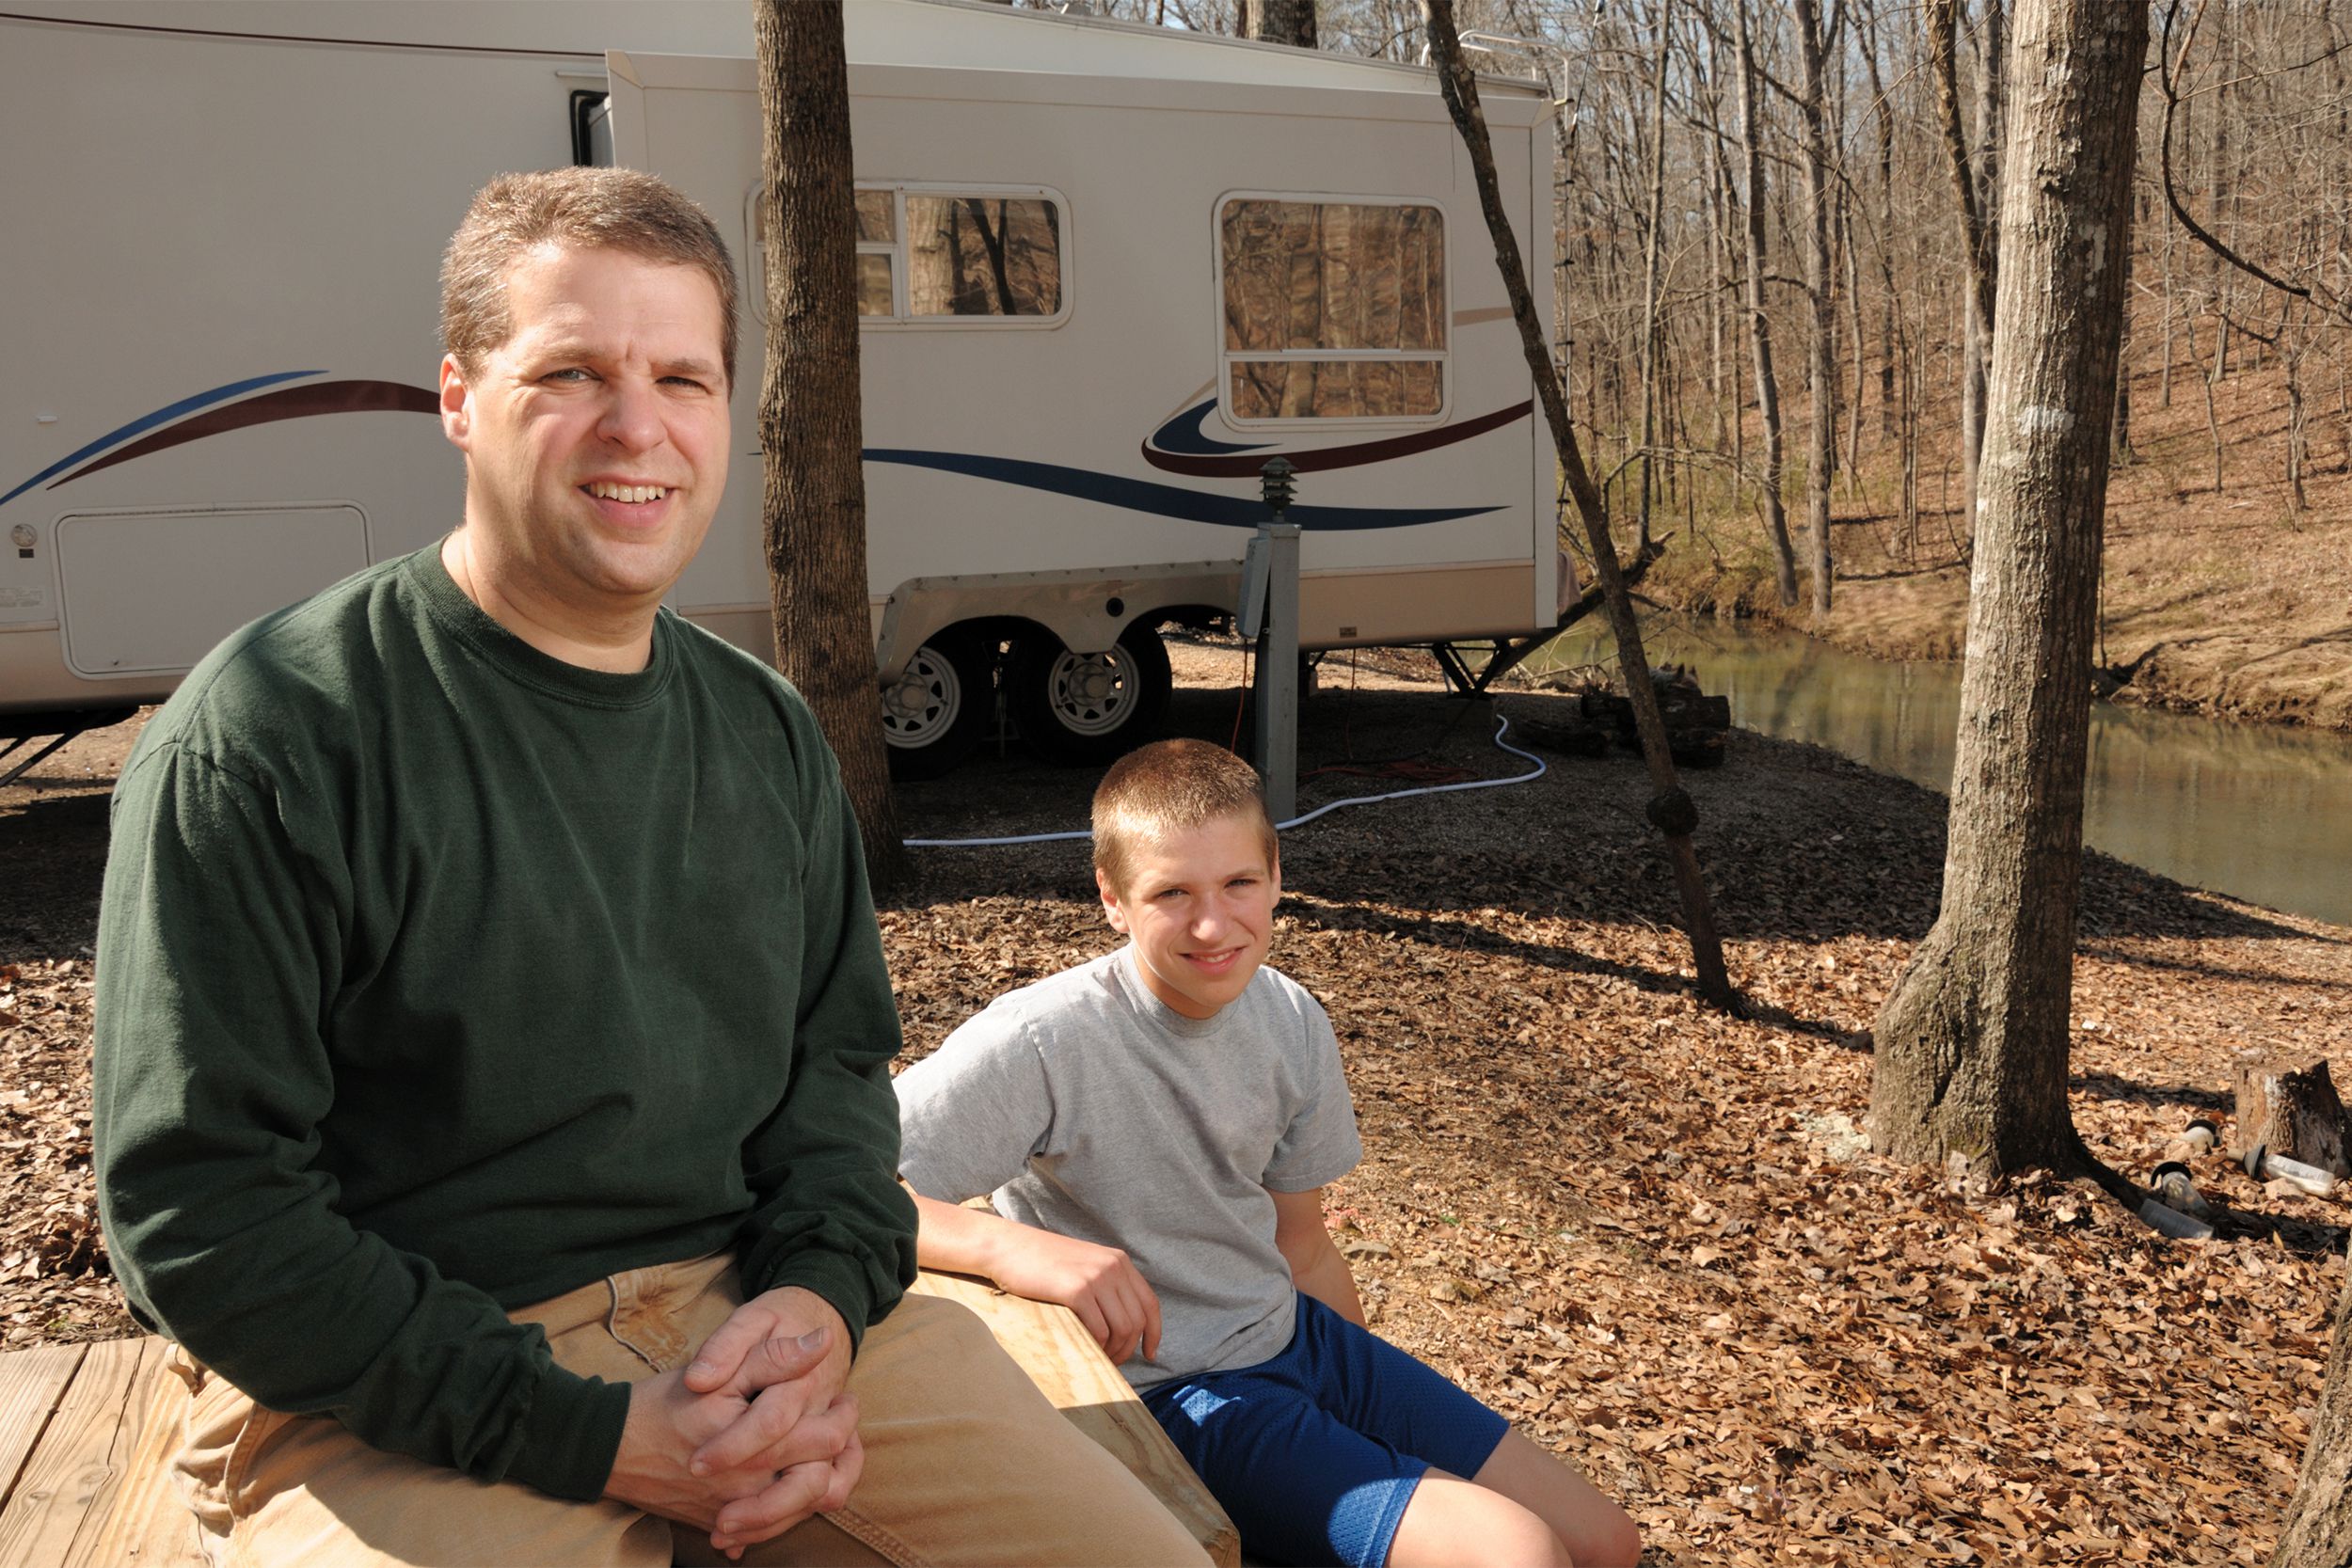 <p>While younger RV owners may be growing, the average owner, according to RV Life, continues to be around 48 years old. These individuals are typically married, have an annual household income of about $68,000, and travel about three to four weeks each year. </p><p><b>Related:</b> <a href="https://blog.cheapism.com/retire-in-an-rv/">What It's Really Like to Retire in an RV</a></p>